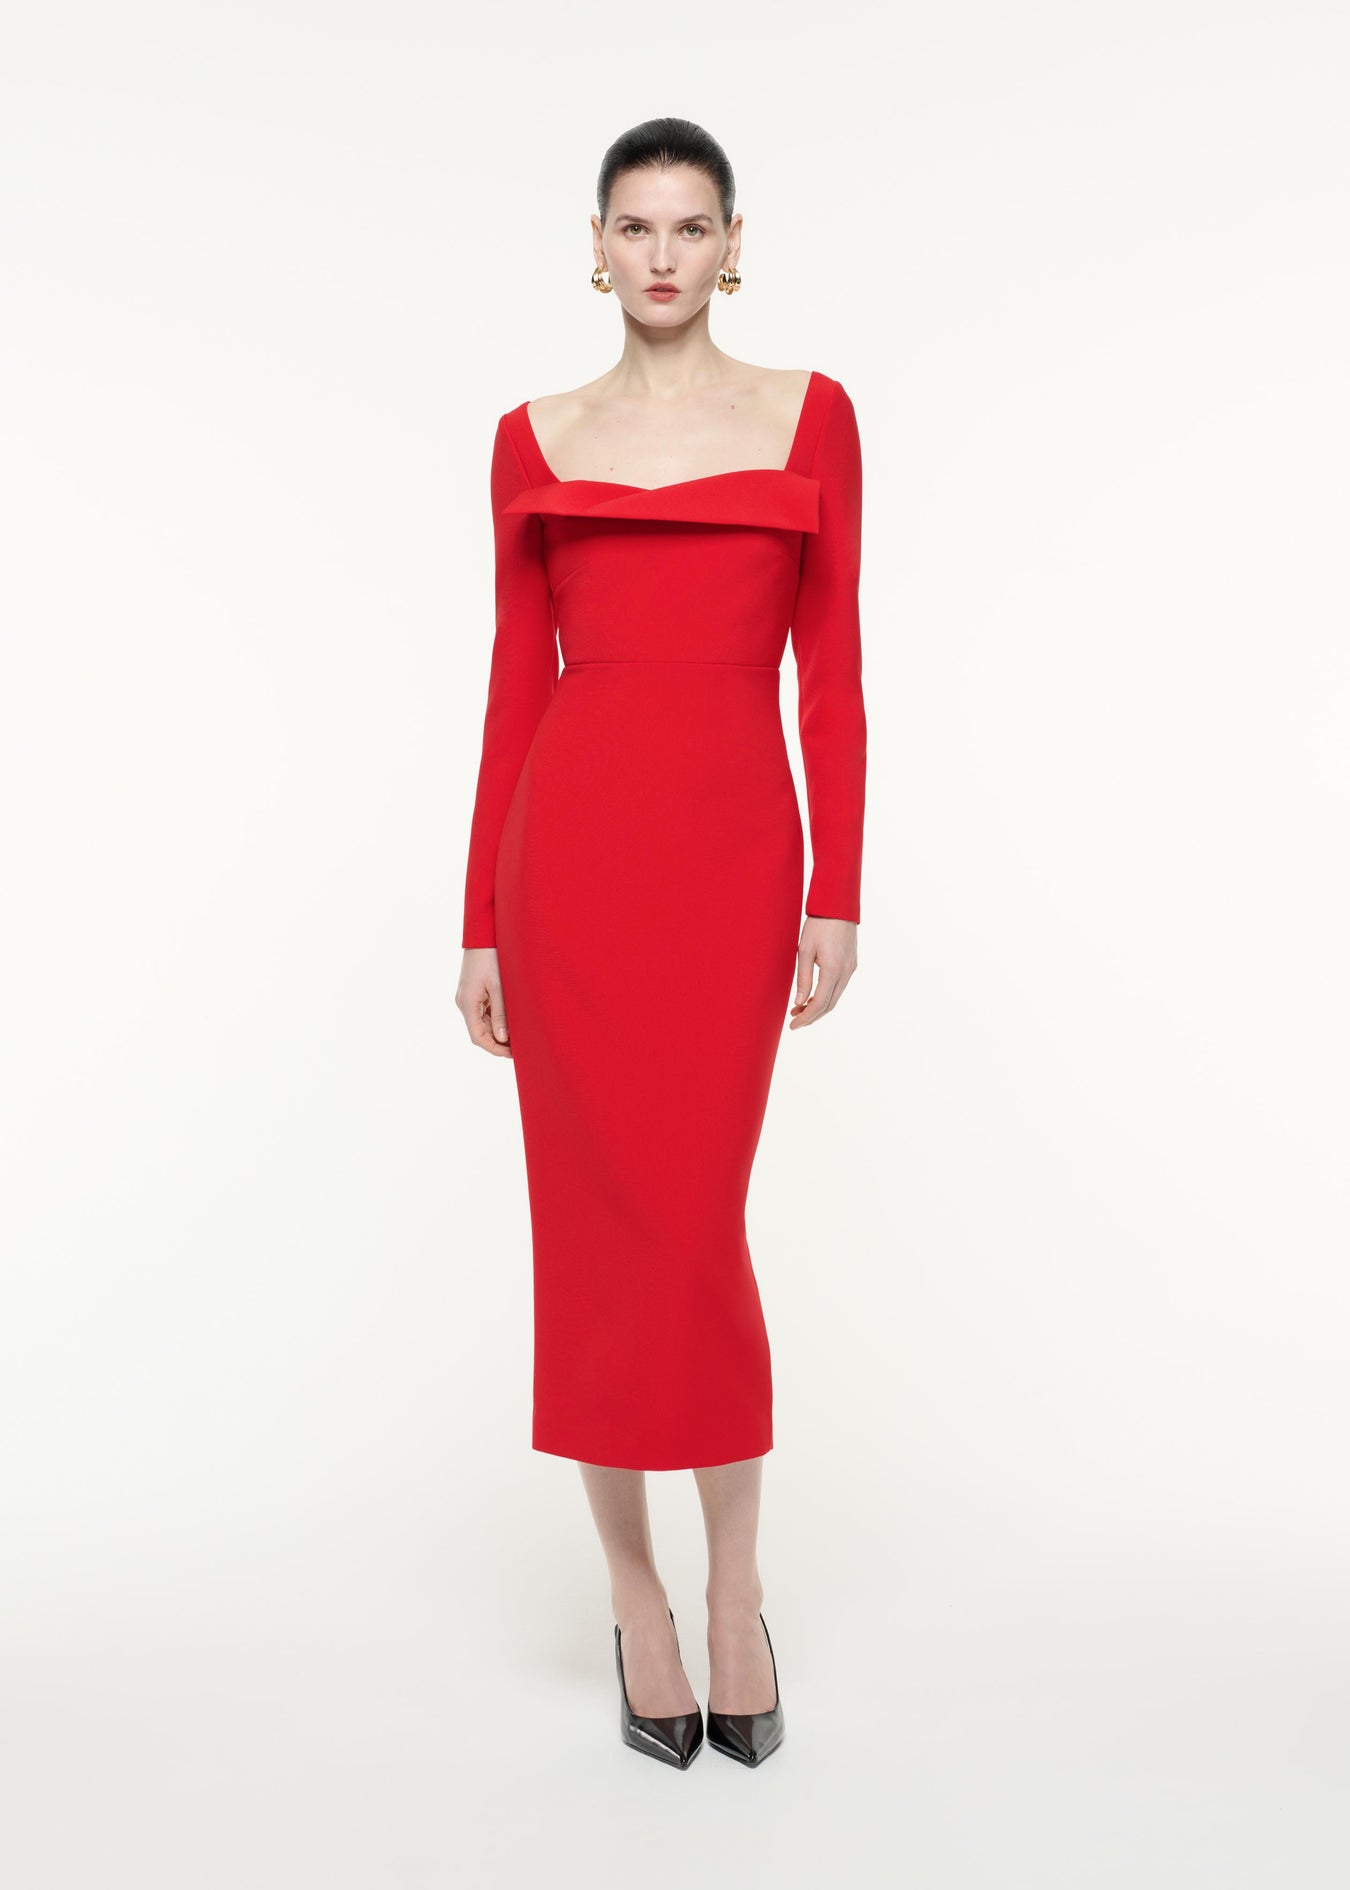 A front view image of a model wearing the Long Sleeve Crepe Midi Dress in Red